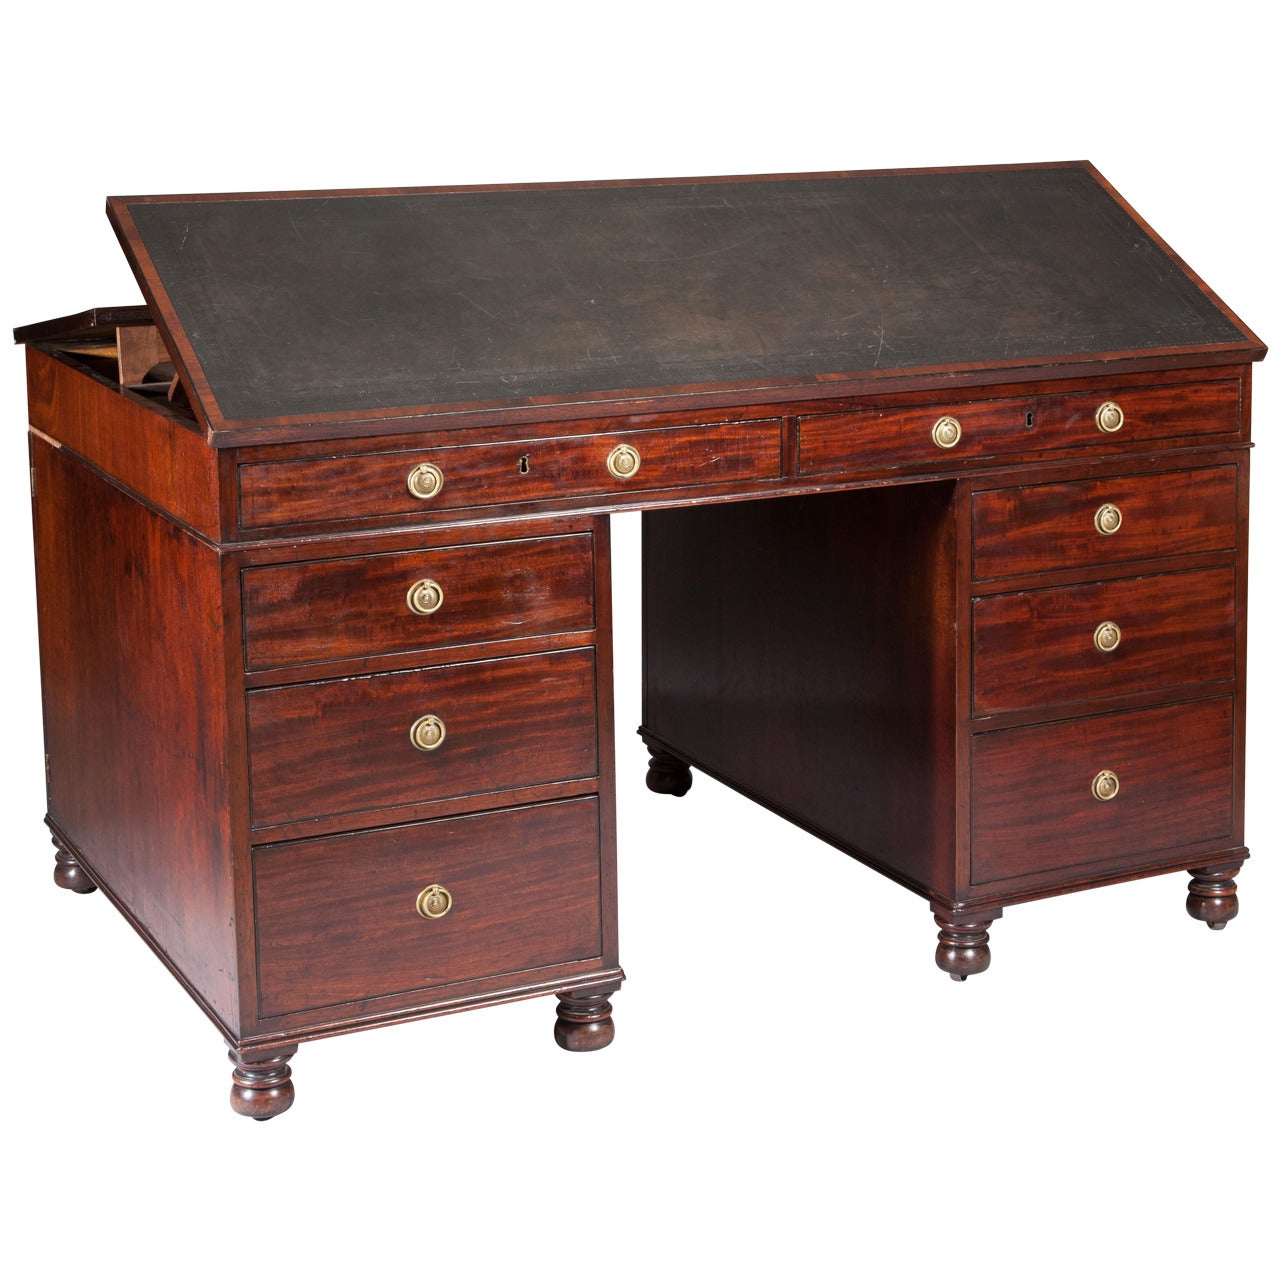 18th Century Pedestal Architect's or Library Desk